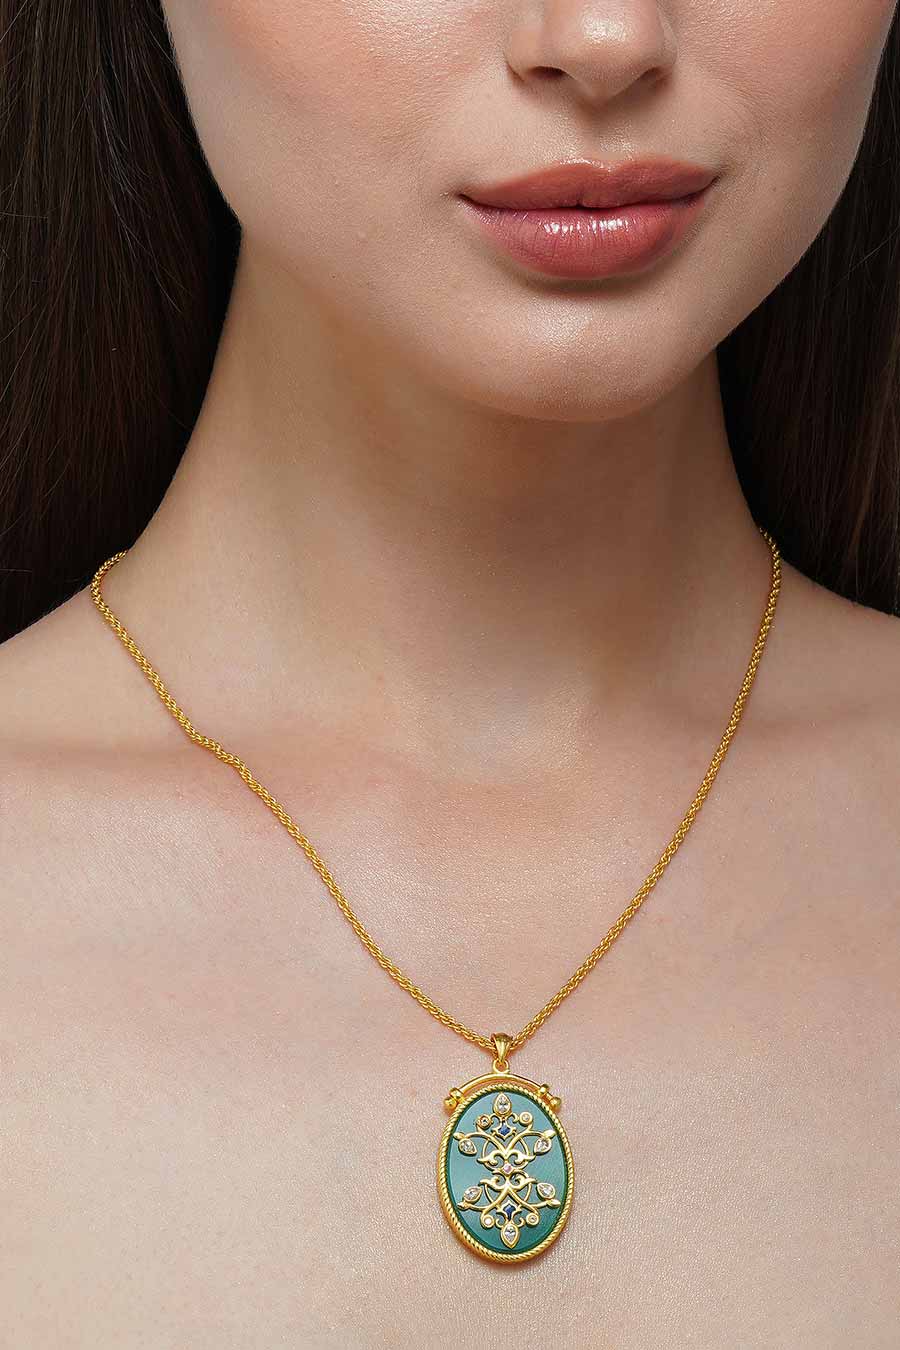 Onyx Refection Of You Gold Plated Pendant Necklace